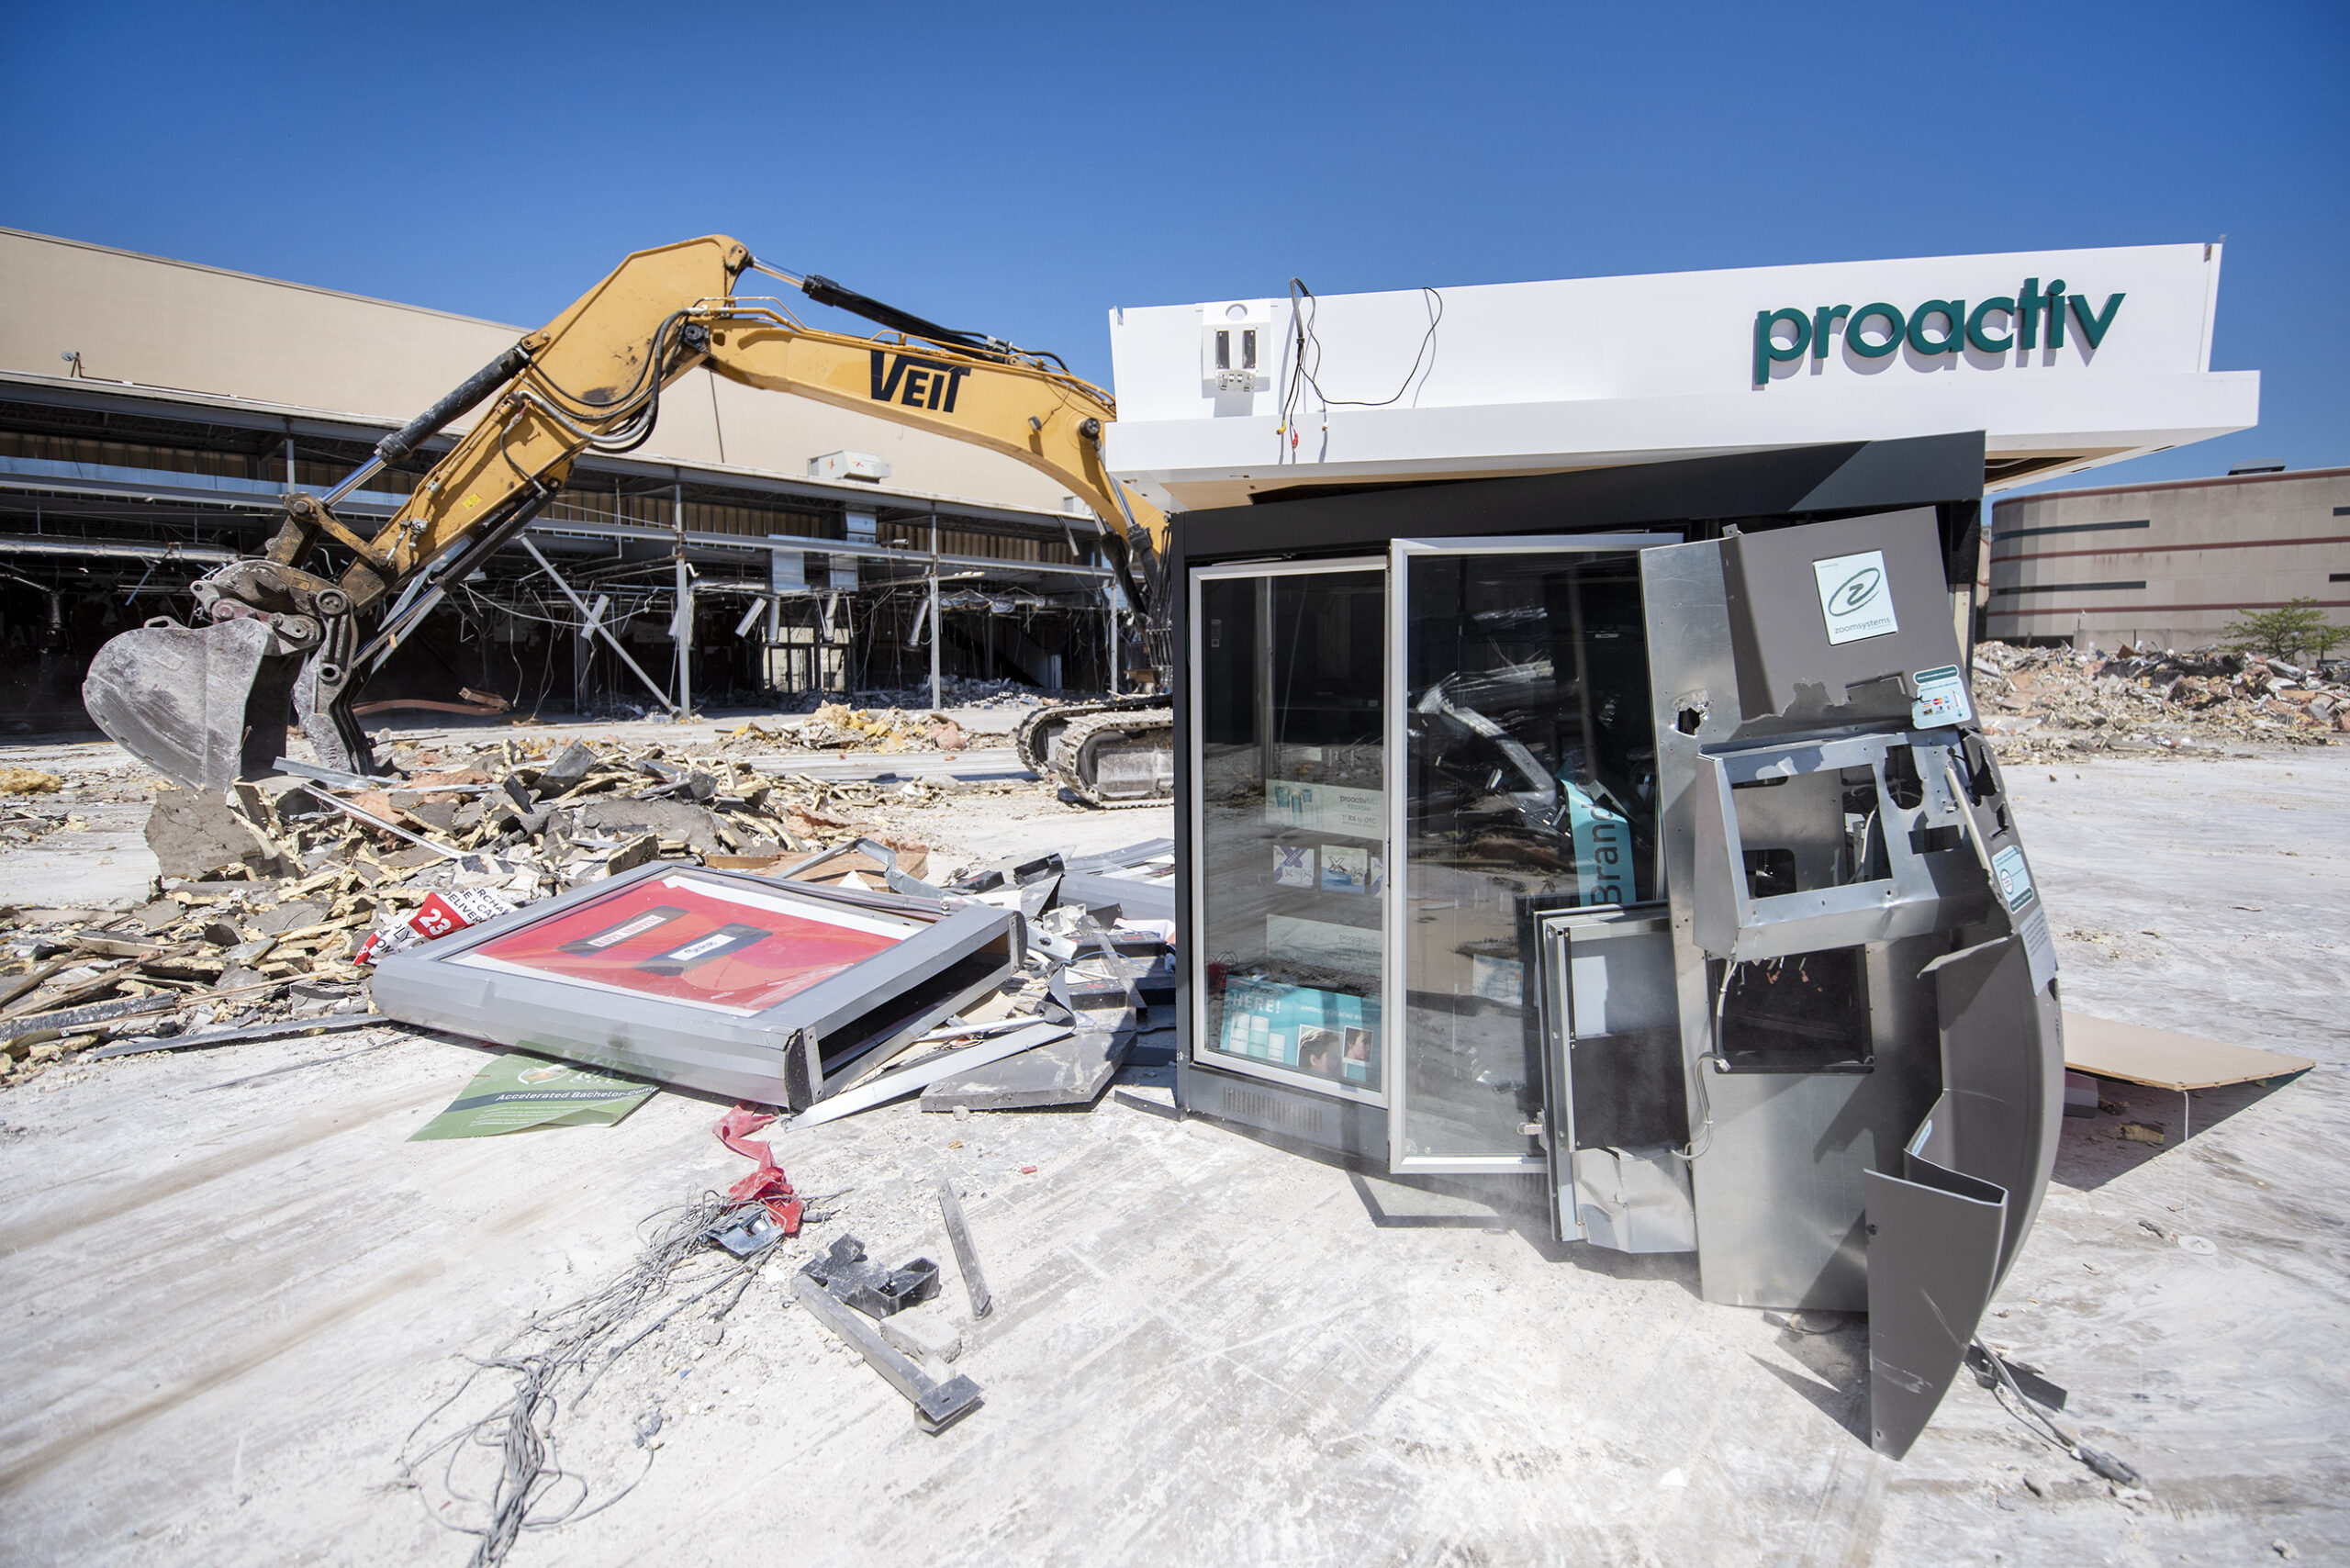 A Proactiv kiosk is partially destroyed as an excavator moves debris behind it.